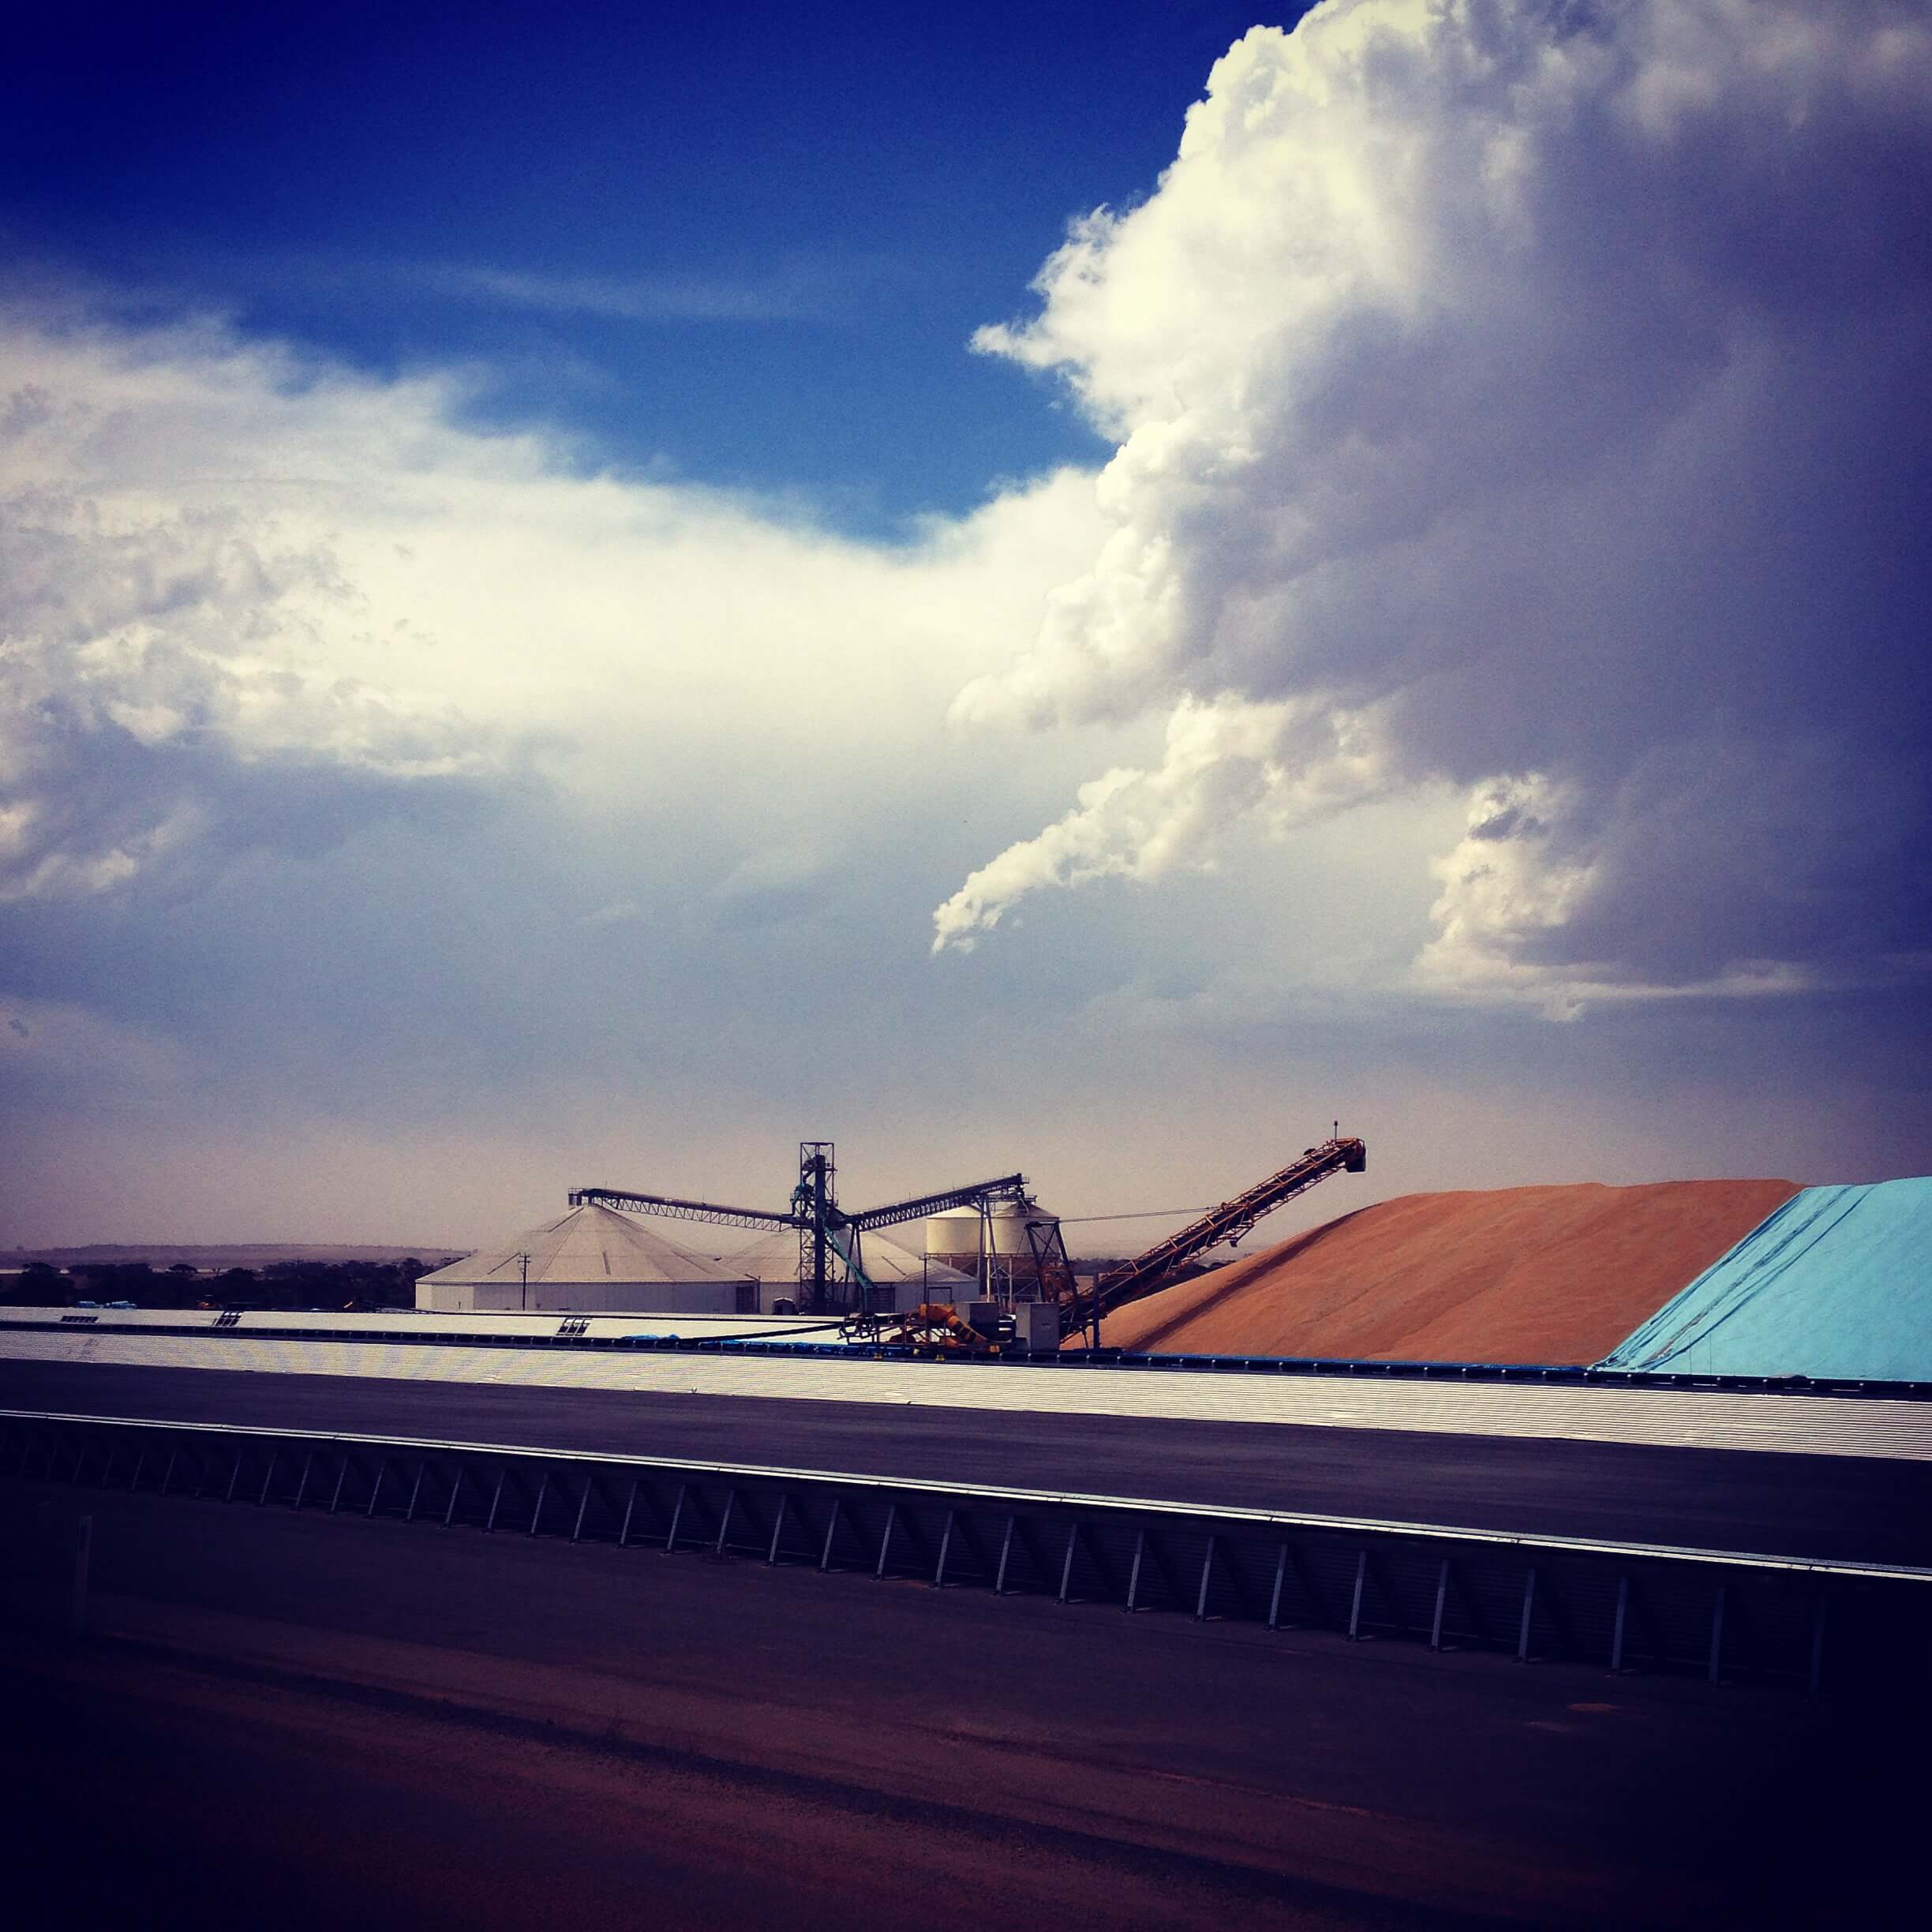 Panoramic shot of grain being loaded in to an open bulkhead with large puffy white clouds overhead. The lower third is the asphalt of the road.